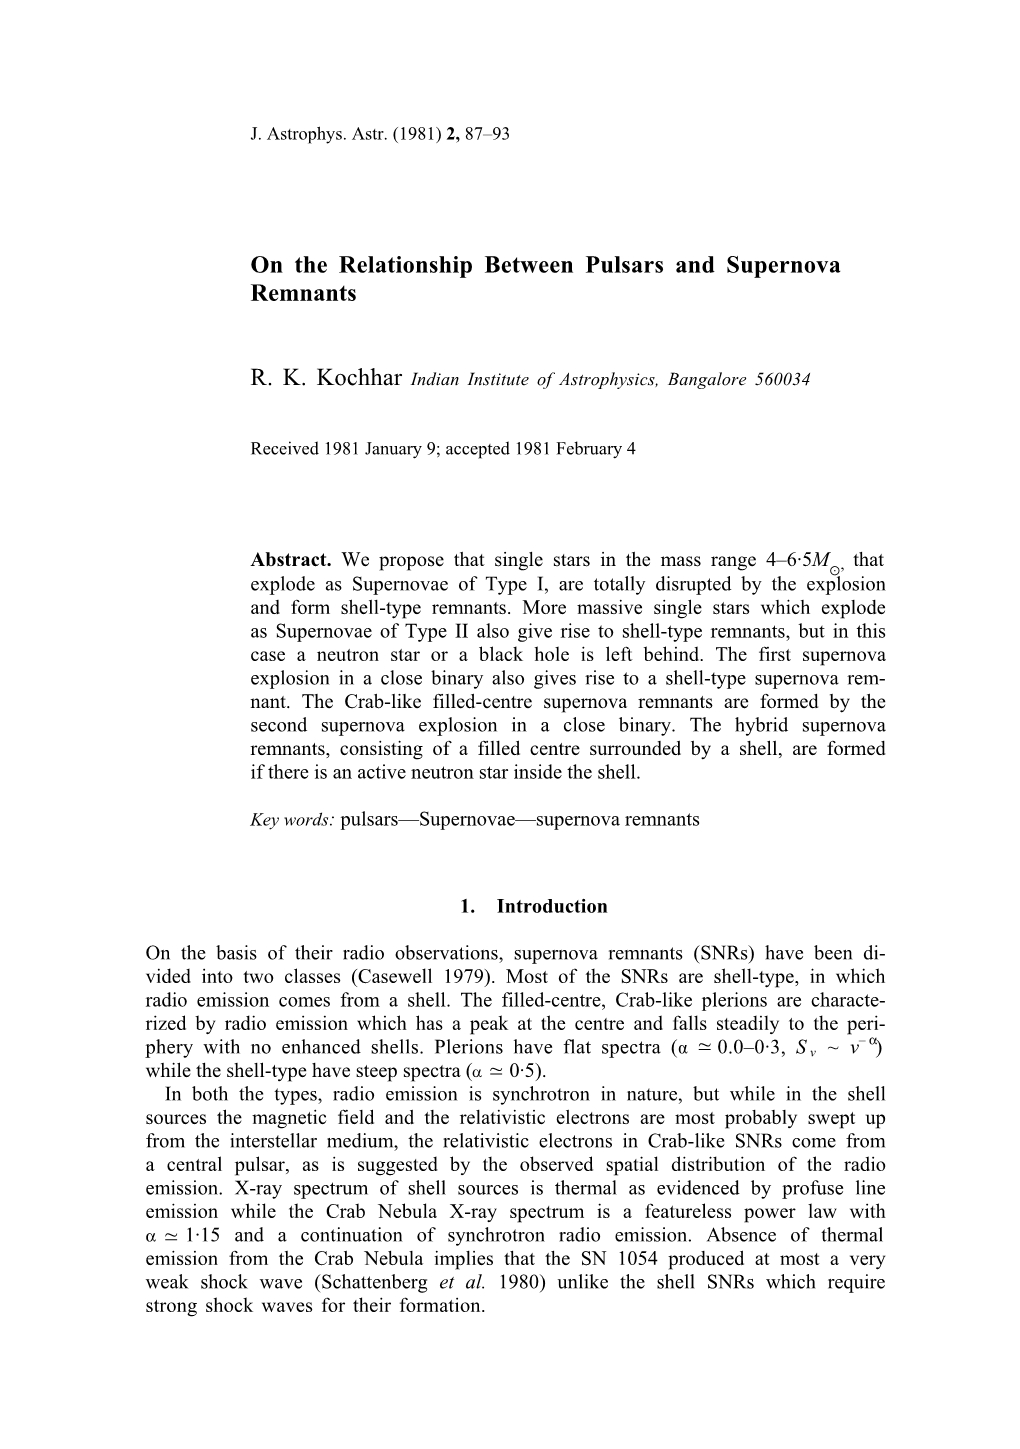 On the Relationship Between Pulsars and Supernova Remnants